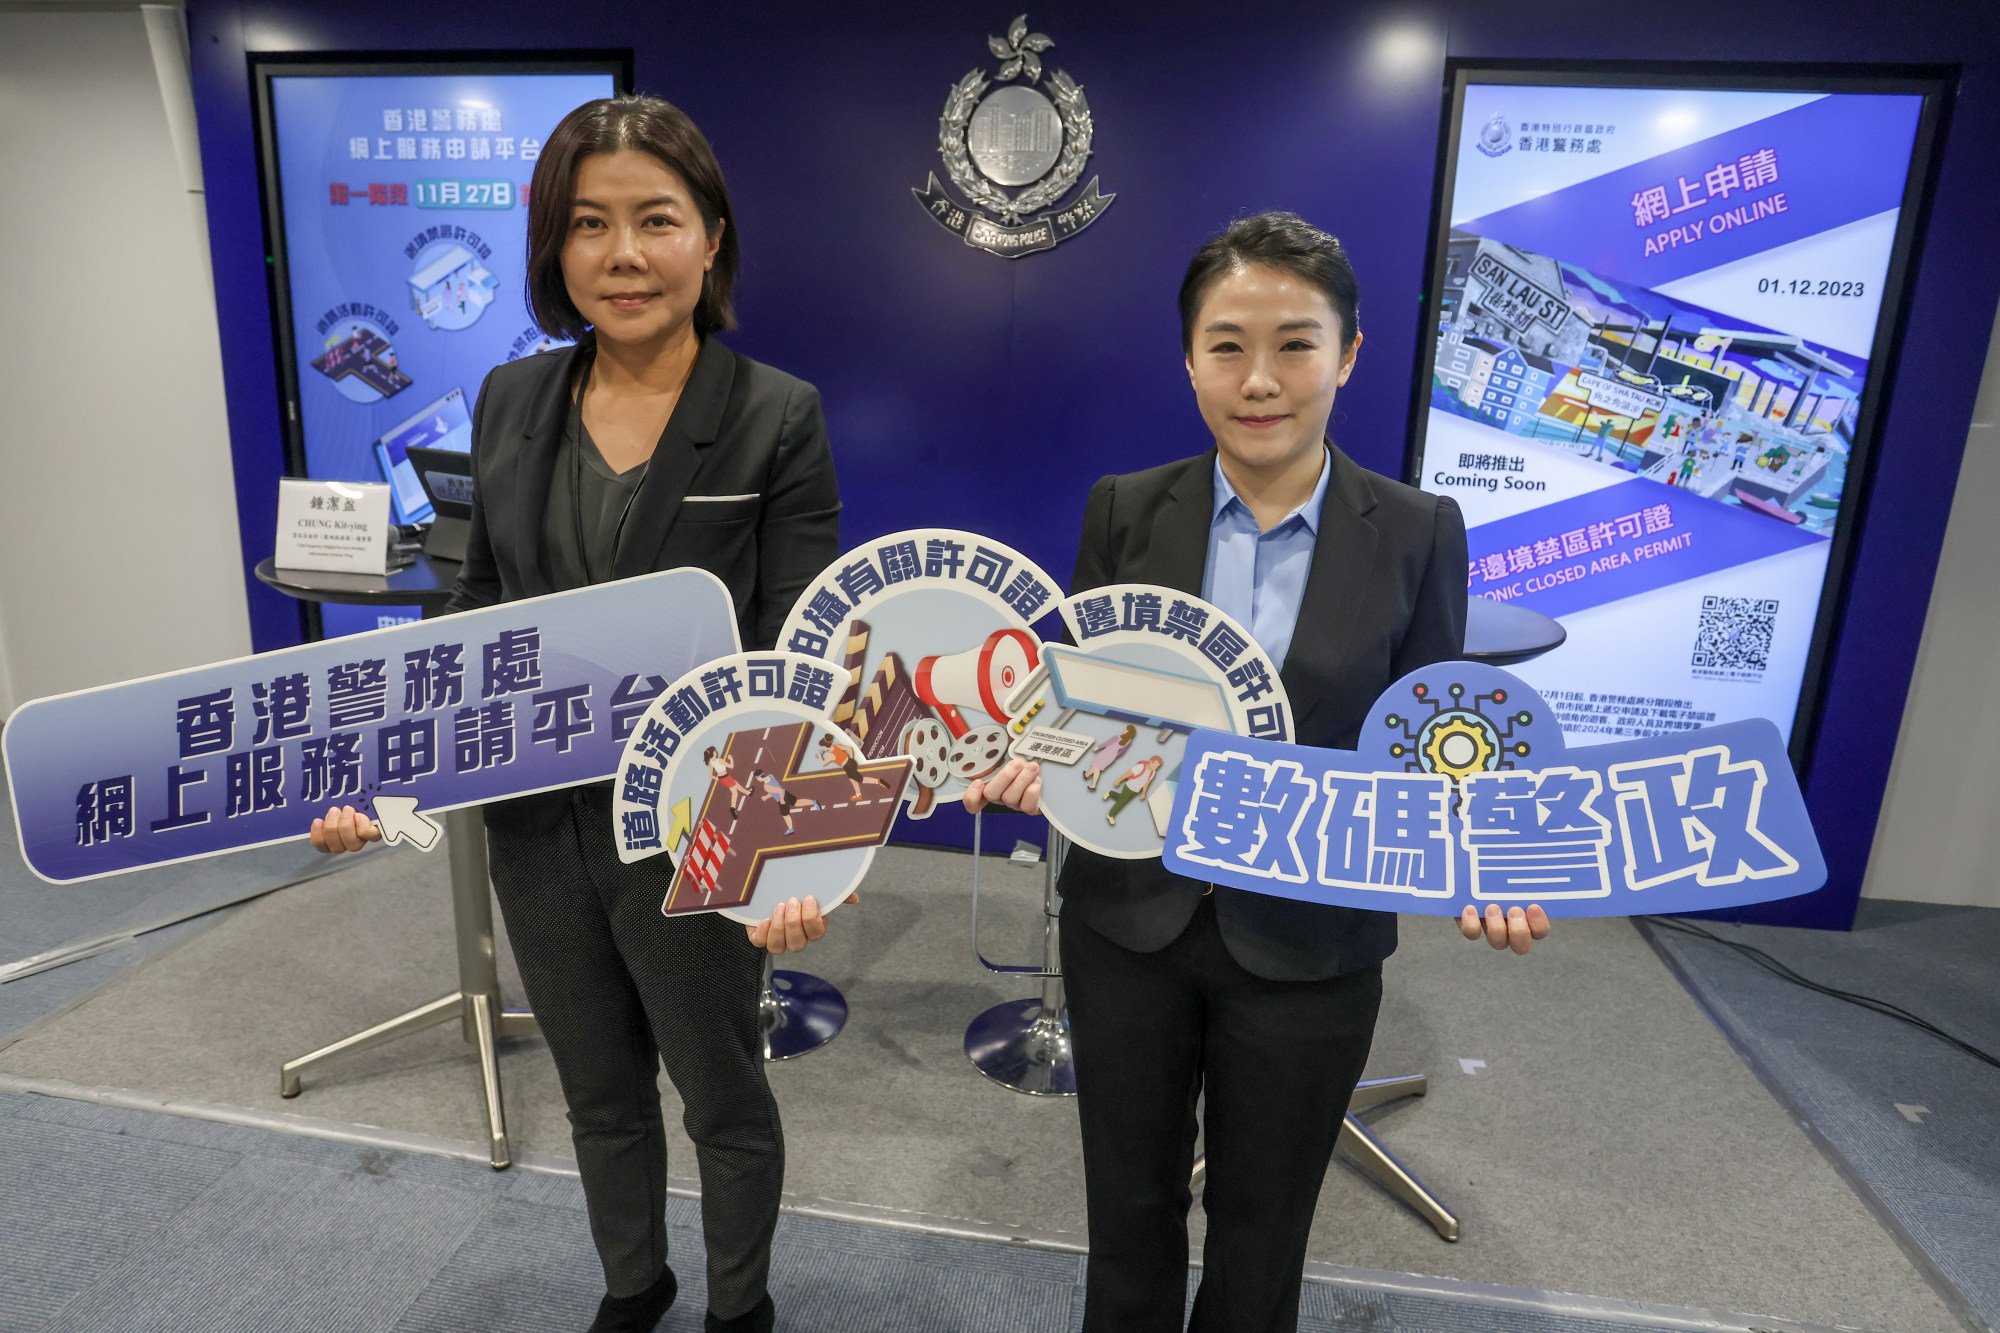 applications to visit restricted hong kong frontier town to open next month, with up to 1,000 entry permits available each day from january